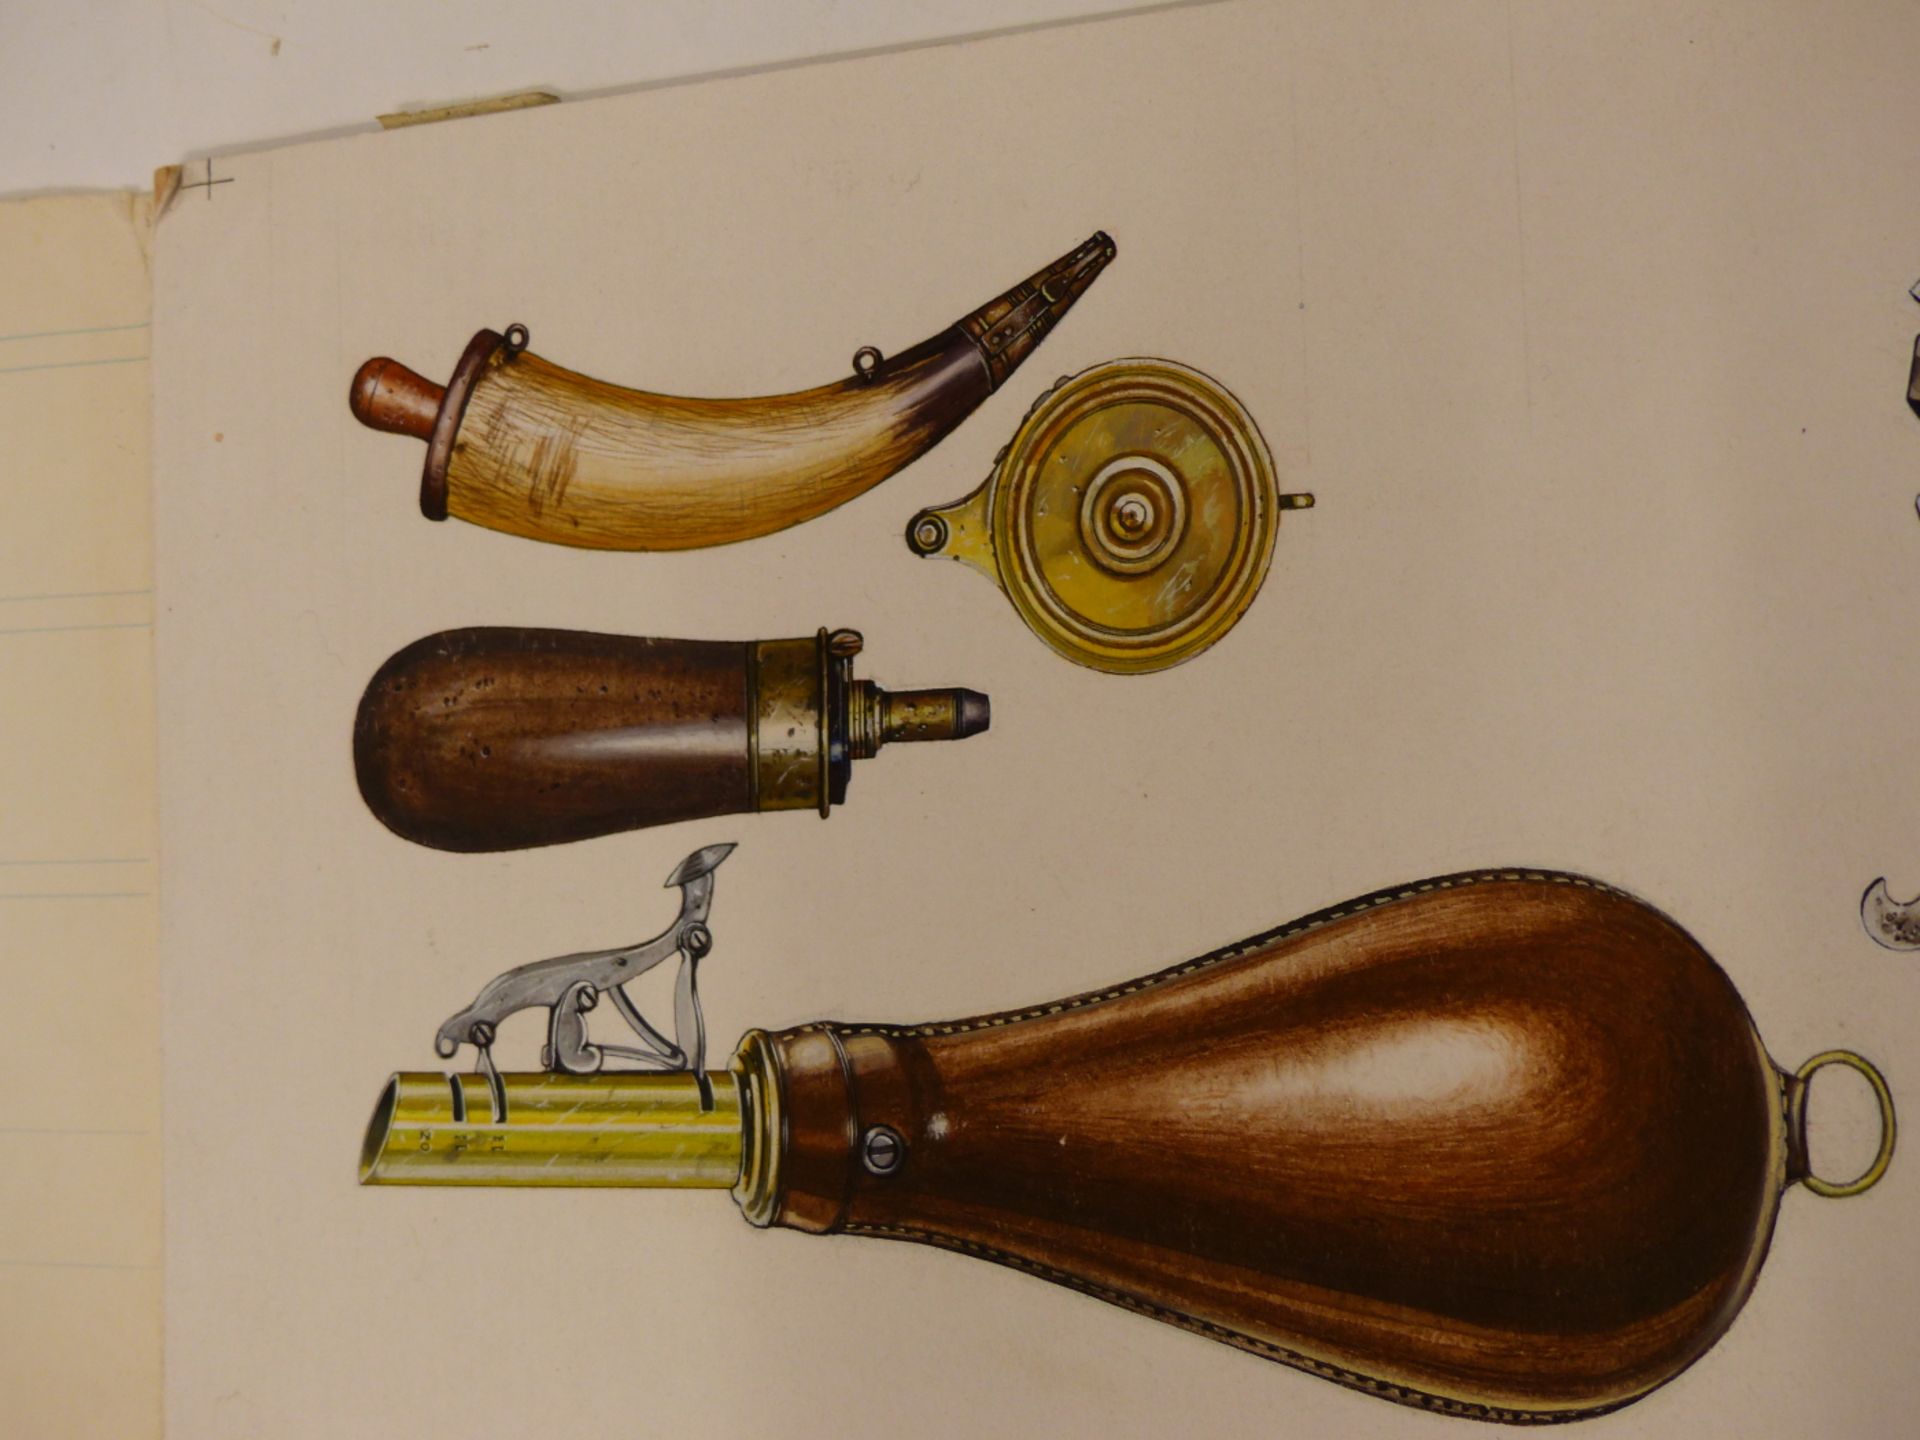 20TH CENTURY SCHOOL. STUDY OF 19TH CENTURY SHOOTING GUN ACCESORIES (POWDER AND SHOT FLASKS, BALL - Image 4 of 4